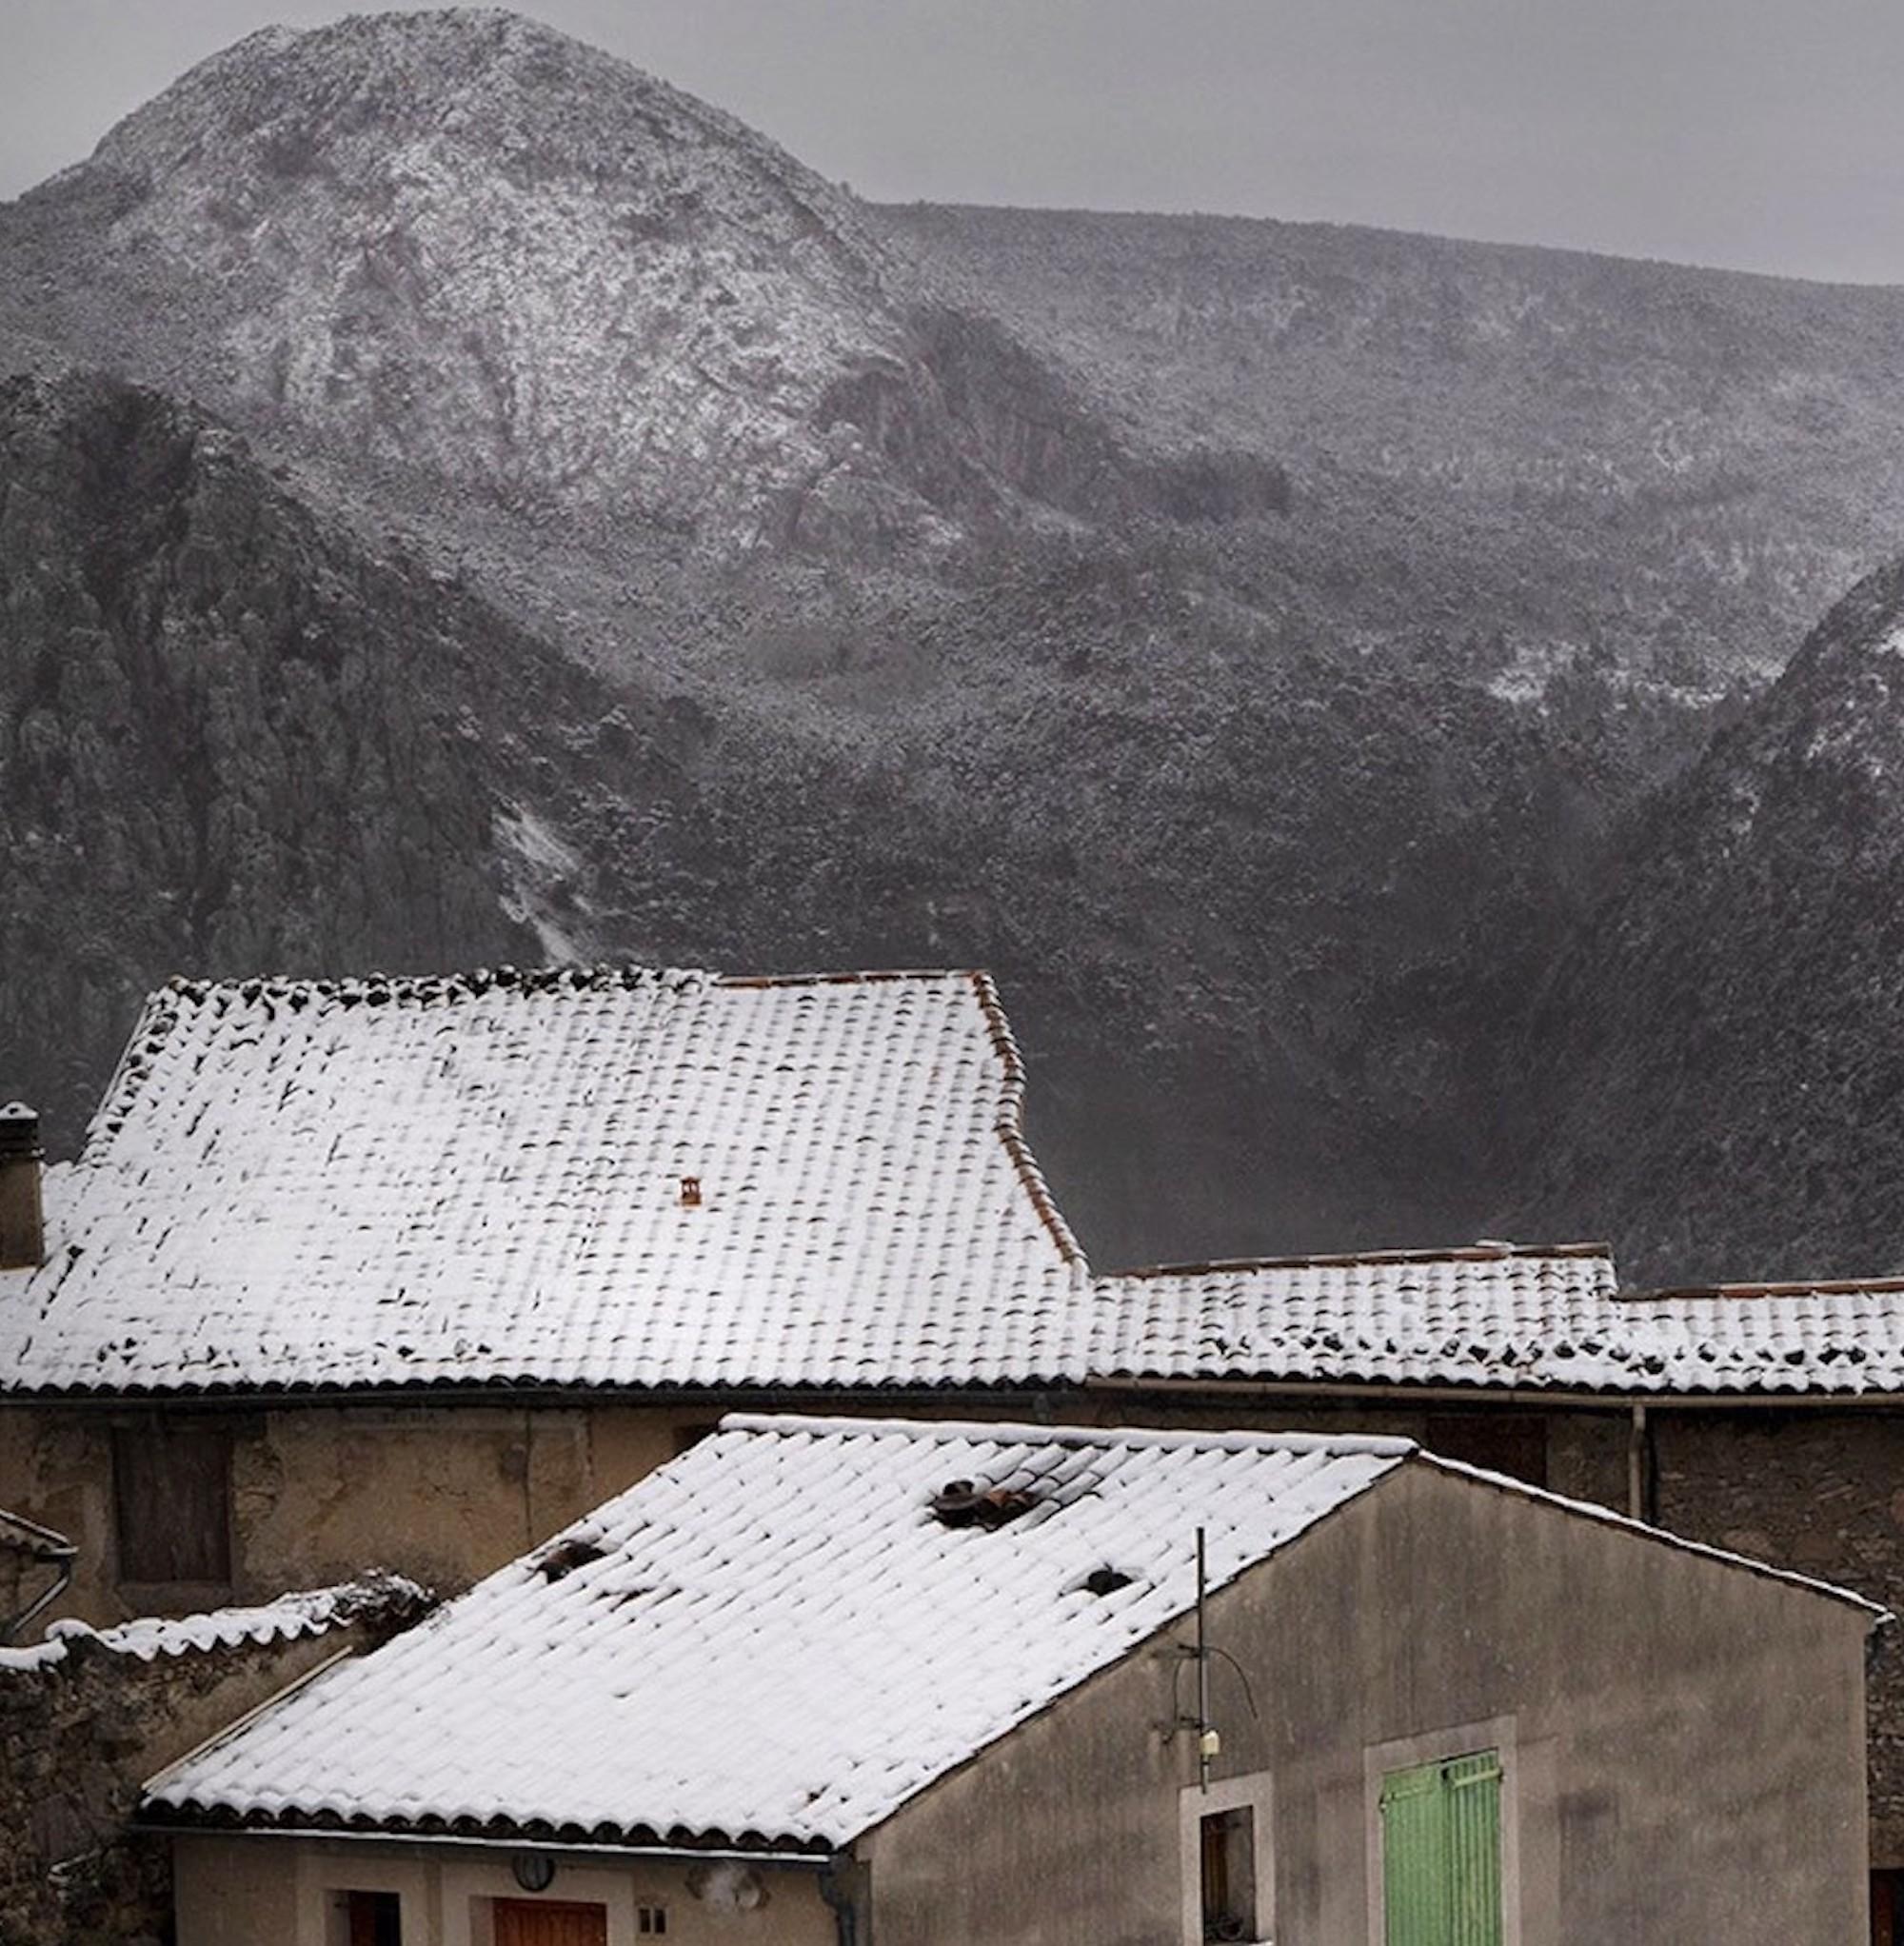 Verdon Roofs by Christophe Jacrot - Winter photography, architecture, mountains For Sale 2